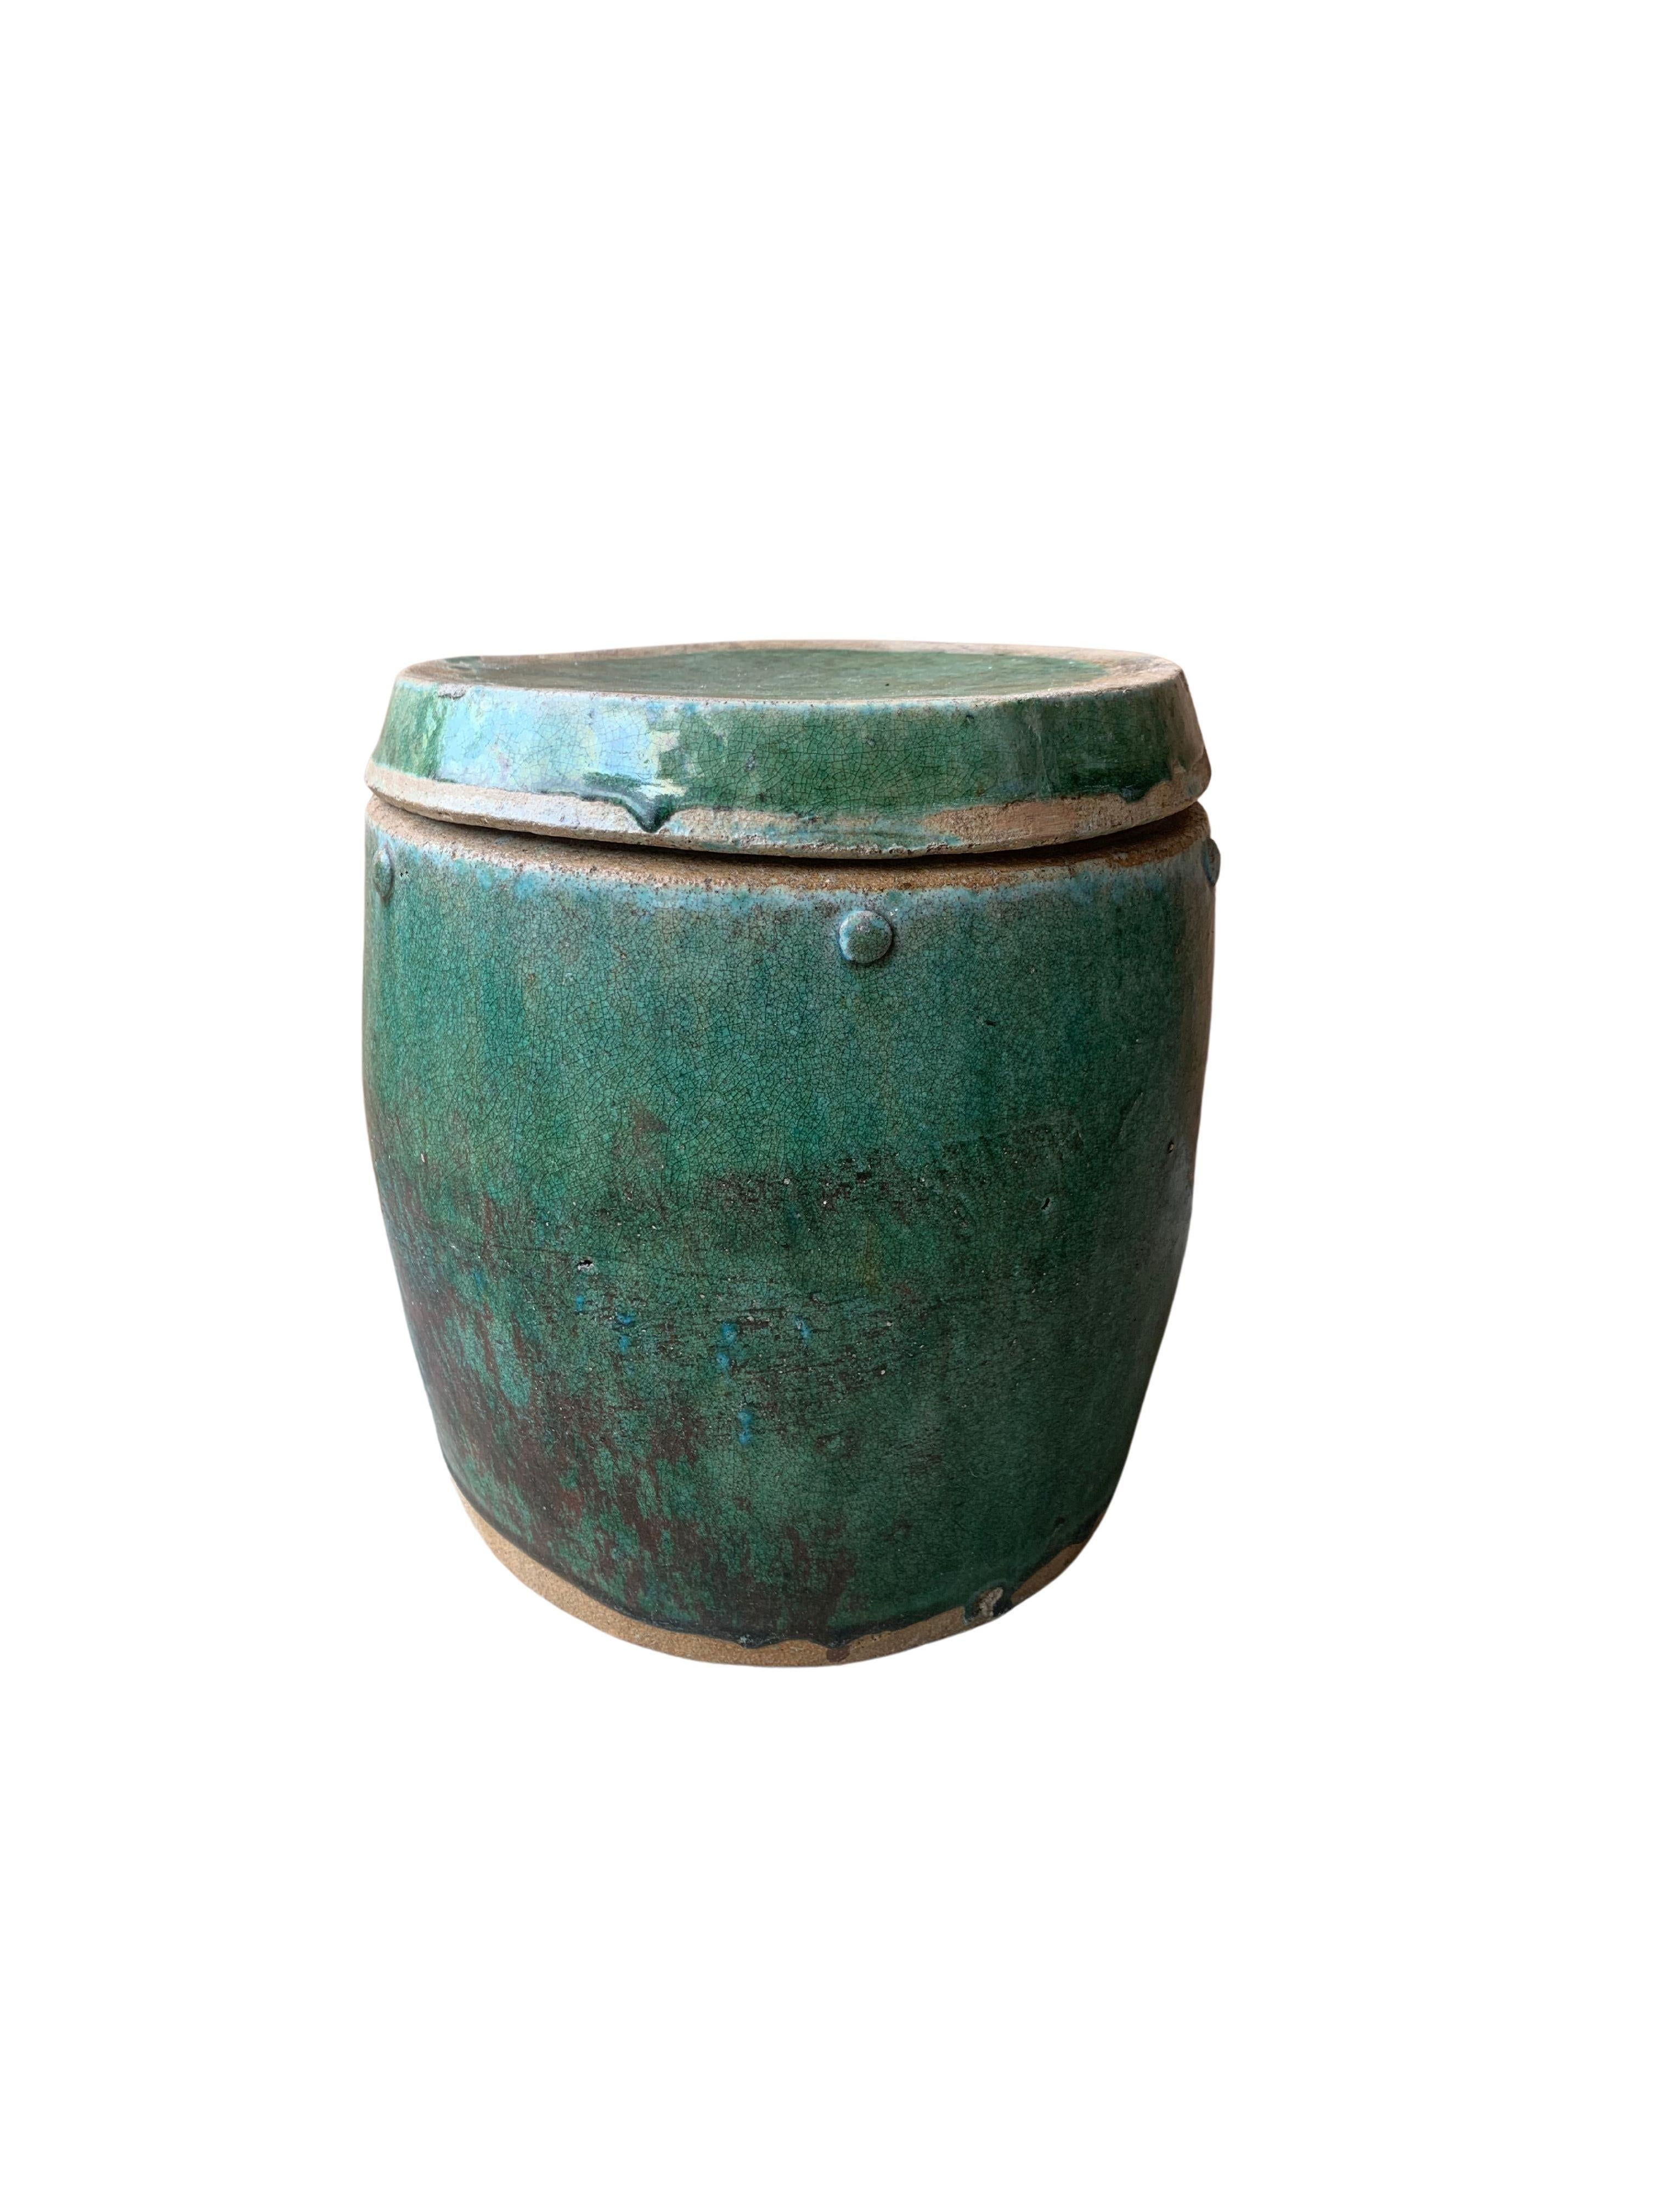 A wonderful green glaze typical of Chinese 